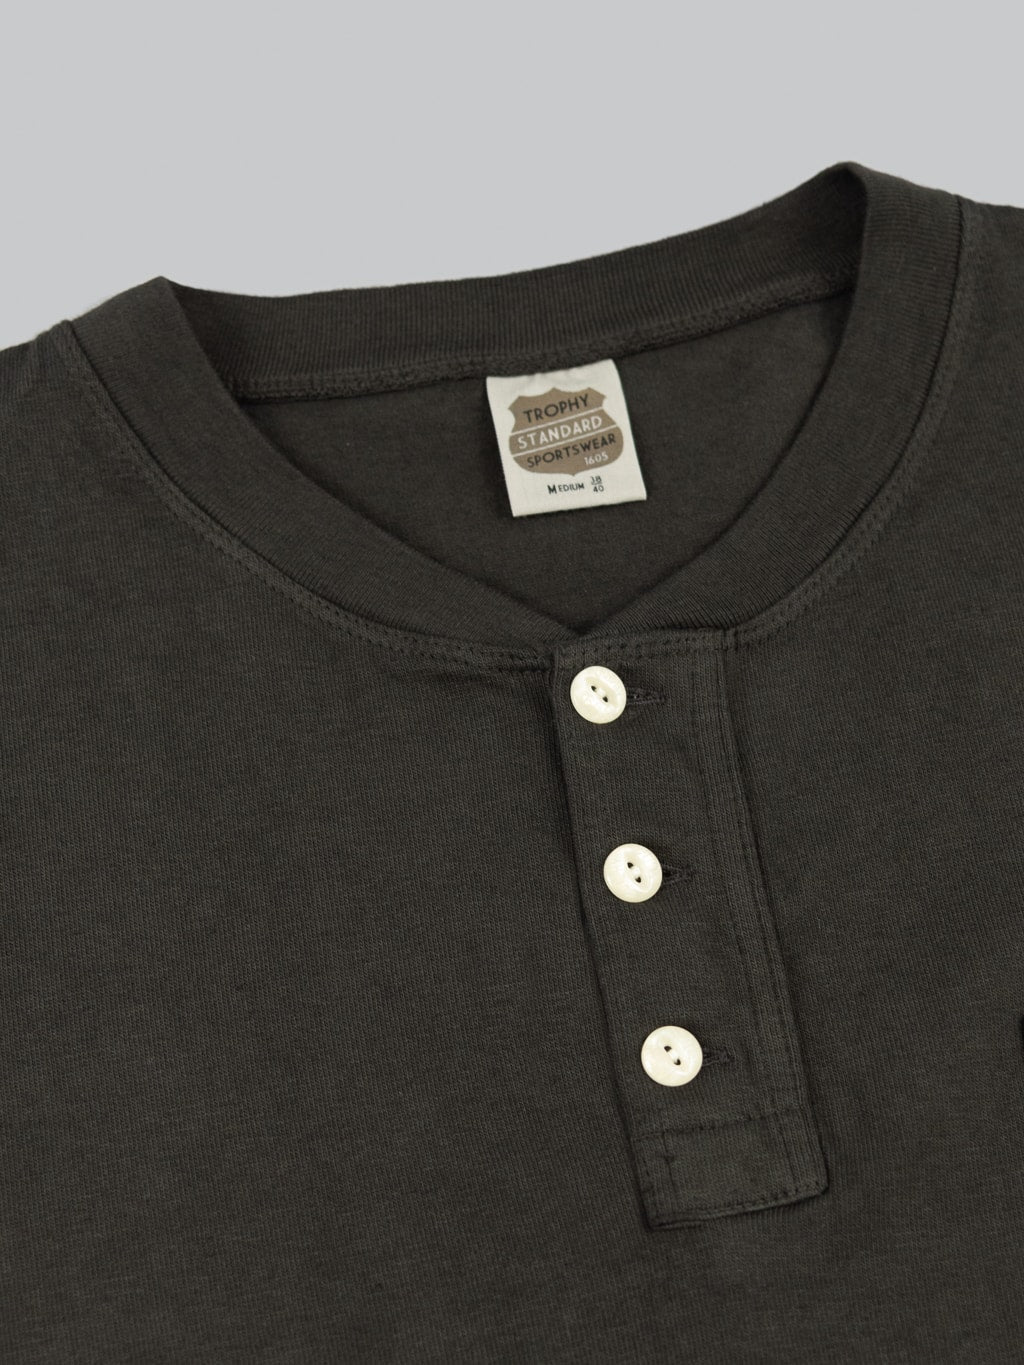 trophy clothing od henley tee black buttons